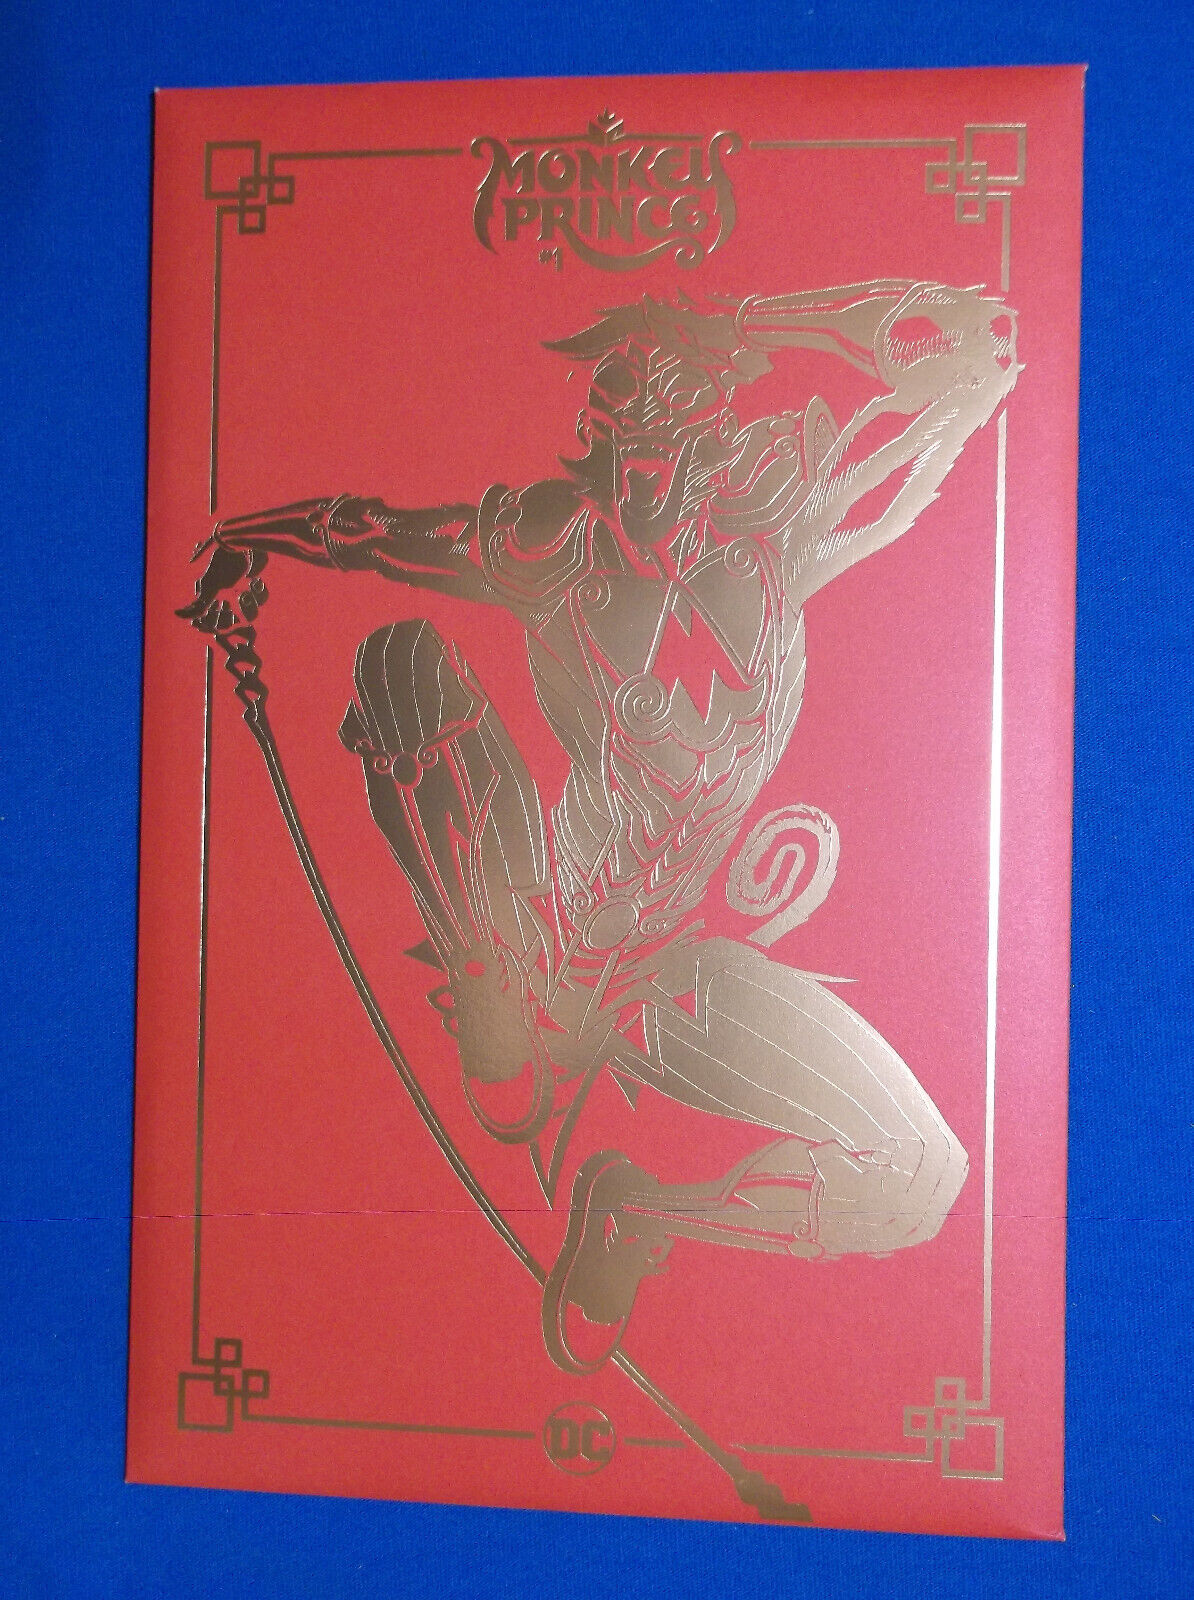 MONKEY PRINCE # 1 - NM 9.4 - GOLD FOIL RED ENVELOPE CARD STOCK VARIANT - CHANG